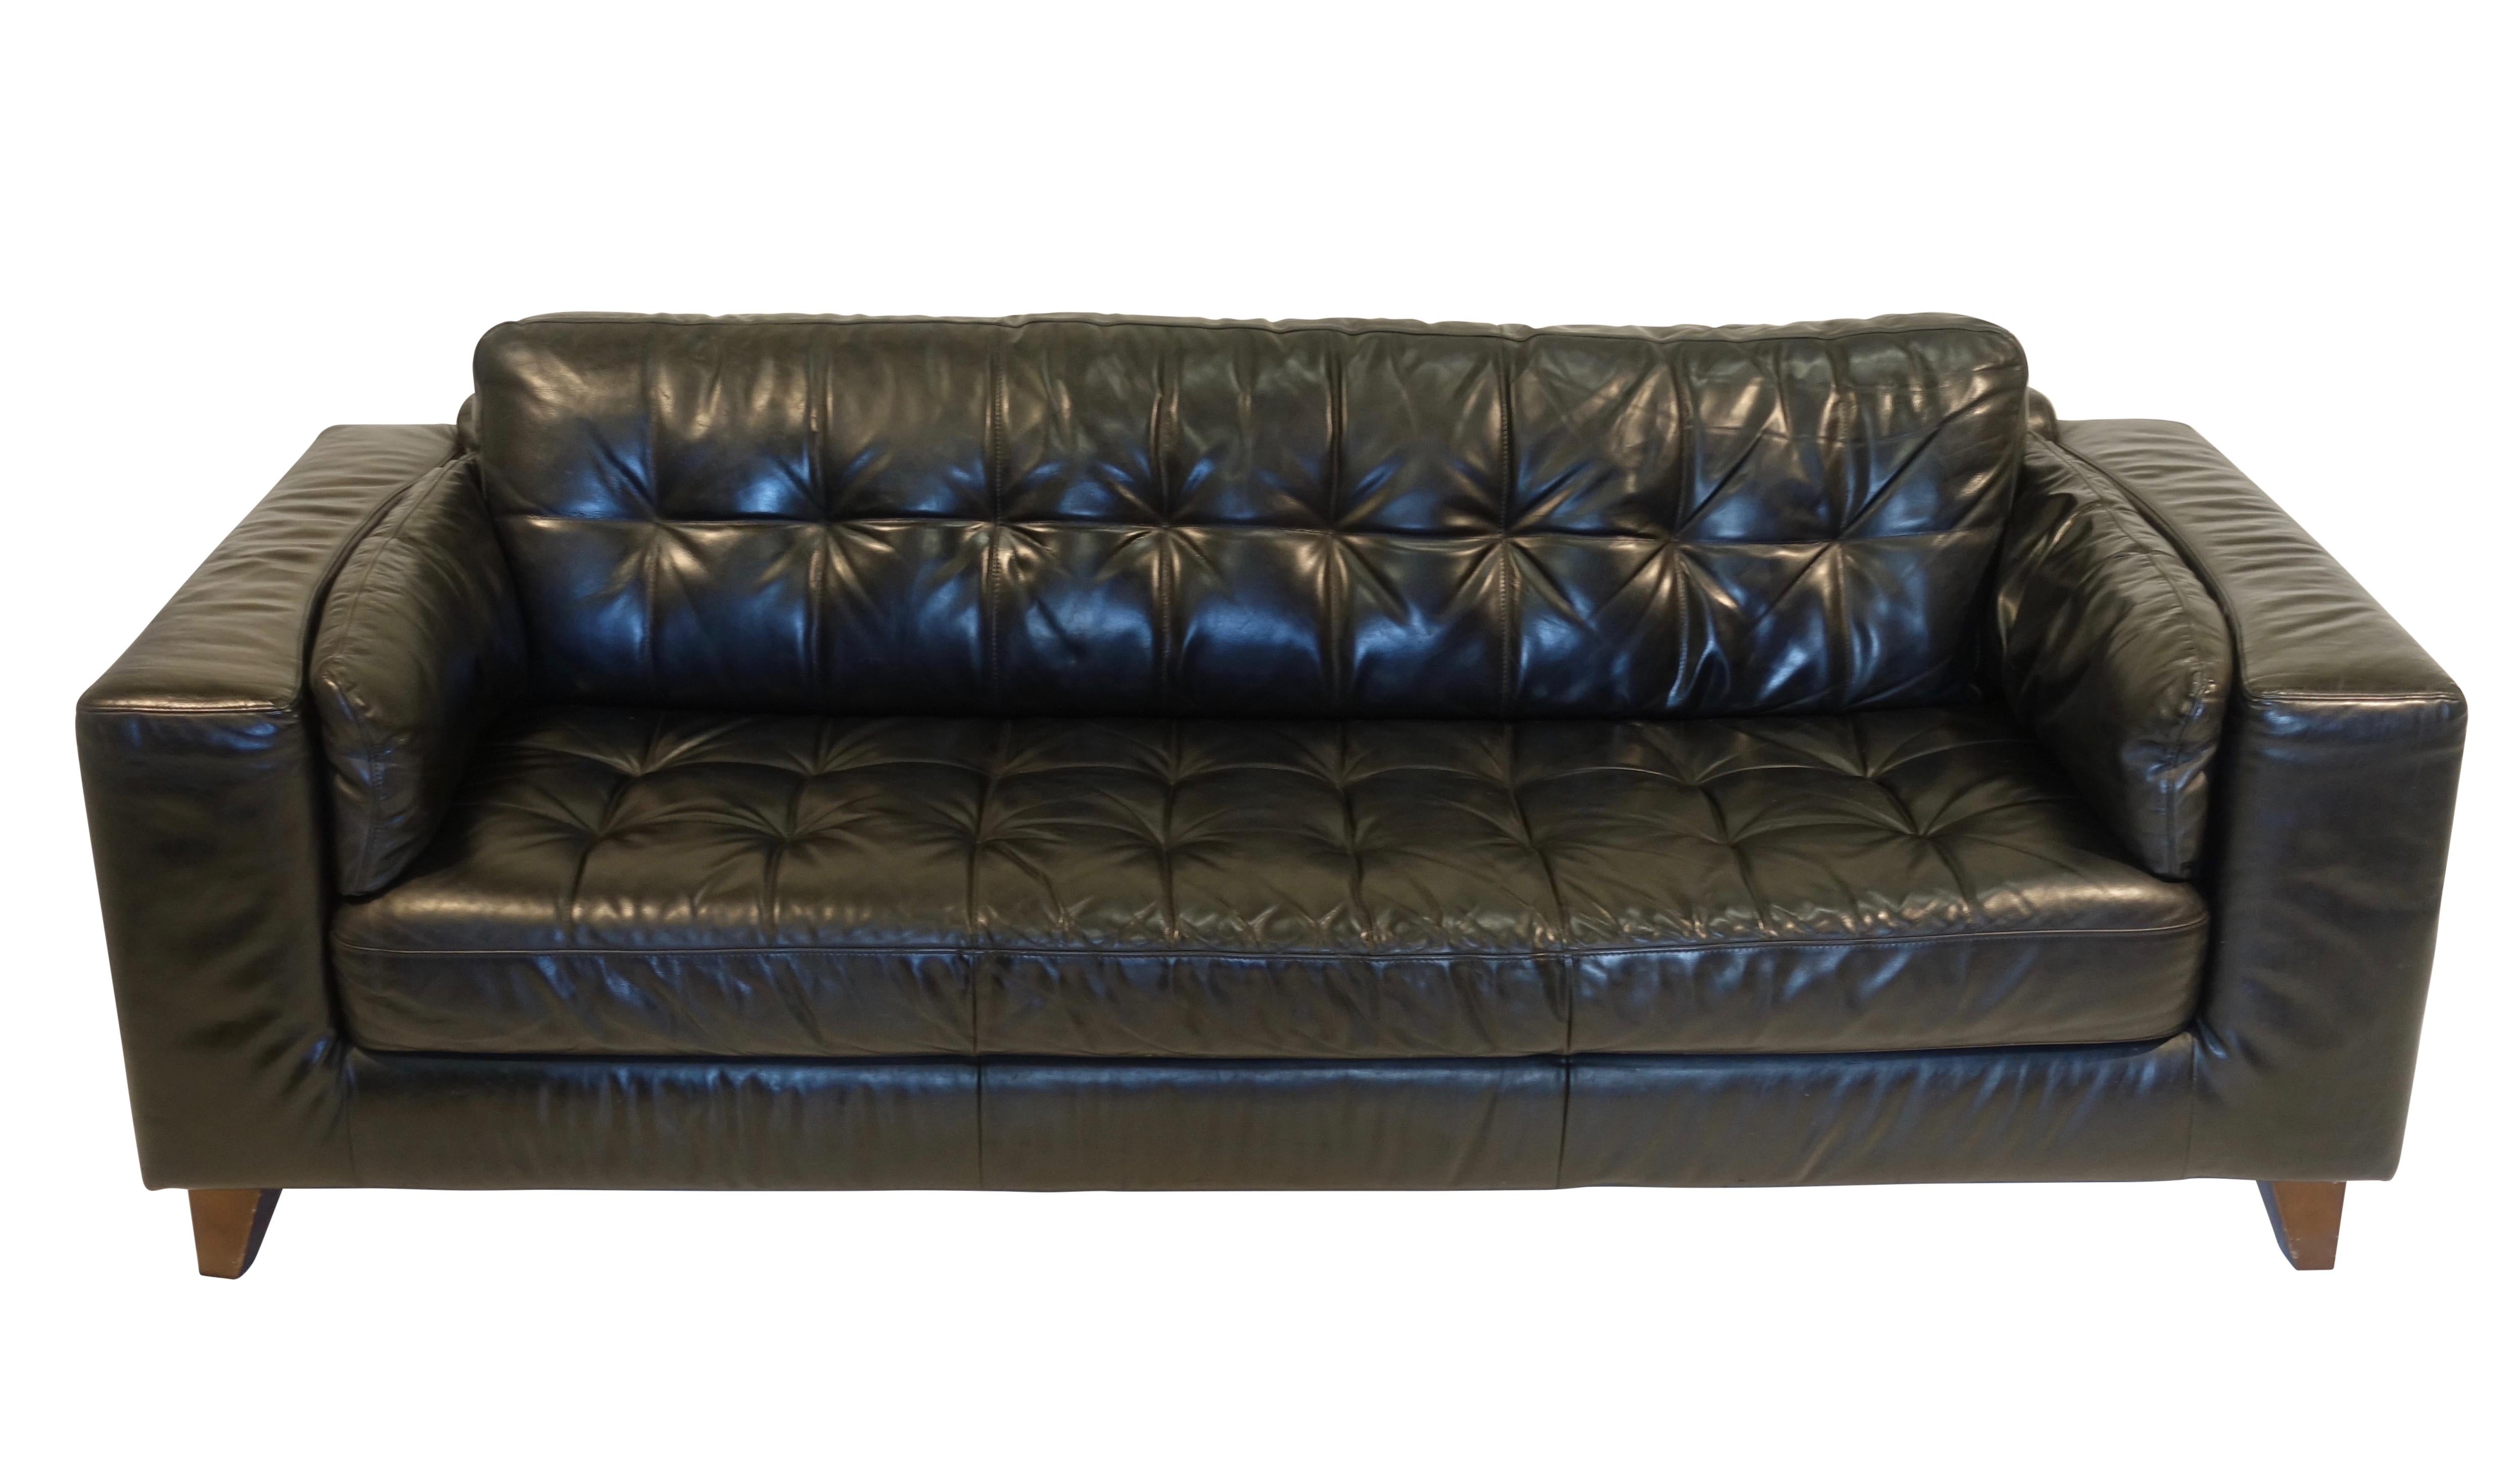 An unusually large vintage Italian black leather sofa with tufted seat and back cushion, having broad arms and standing on tapering wooden legs, circa 1970s.